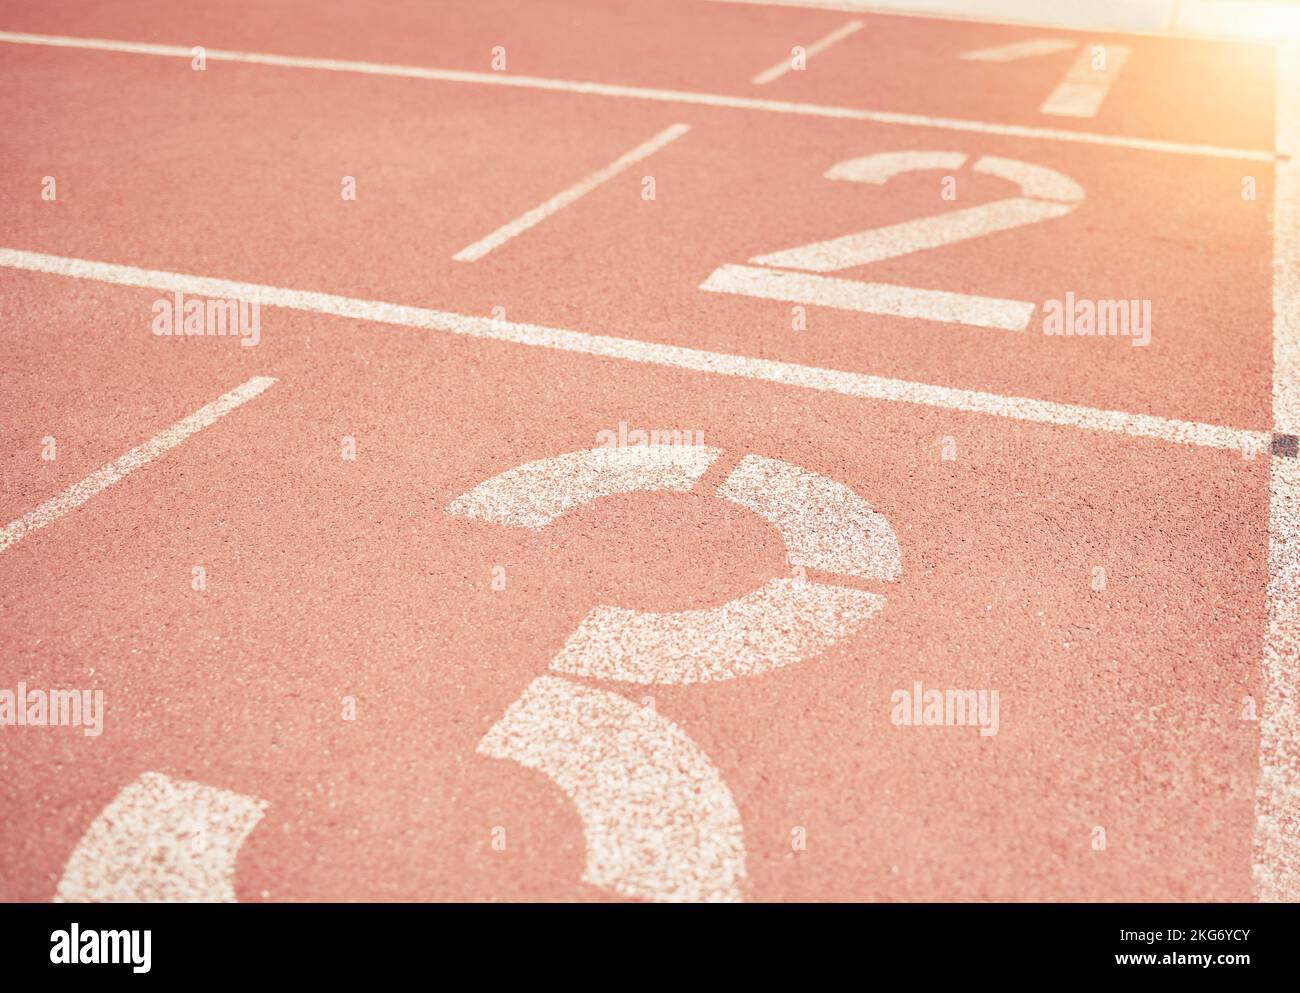 Sports, athletics and number on race track in stadium for training, sprint and running start position. Texture, ground and running track with nobody Stock Photo